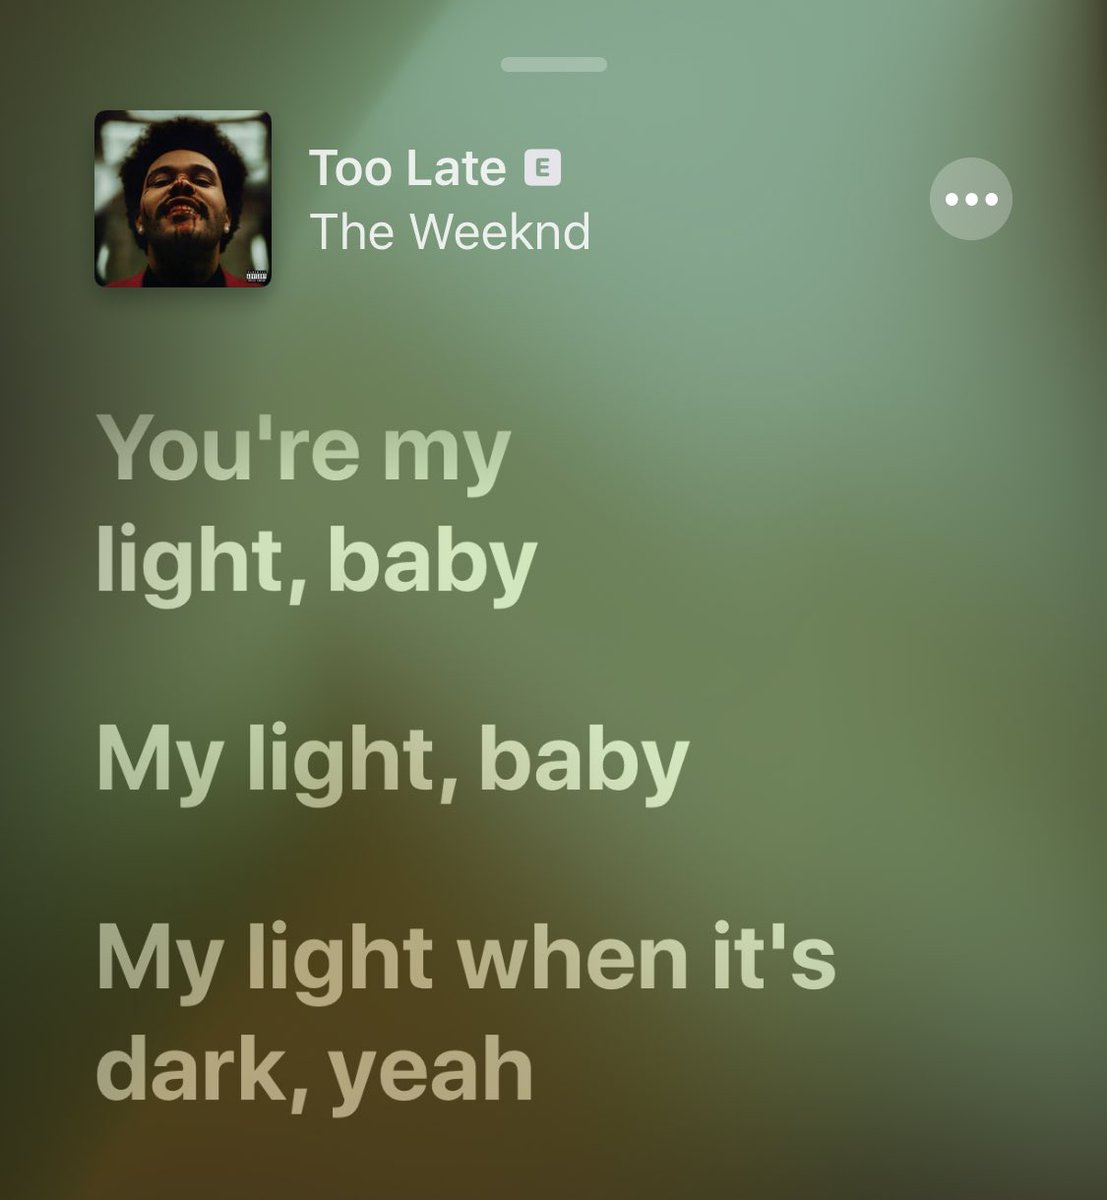 Not to mention Abel also mentions someone being his light in the dark on his track Too Late. His music video for it is coming out soon 